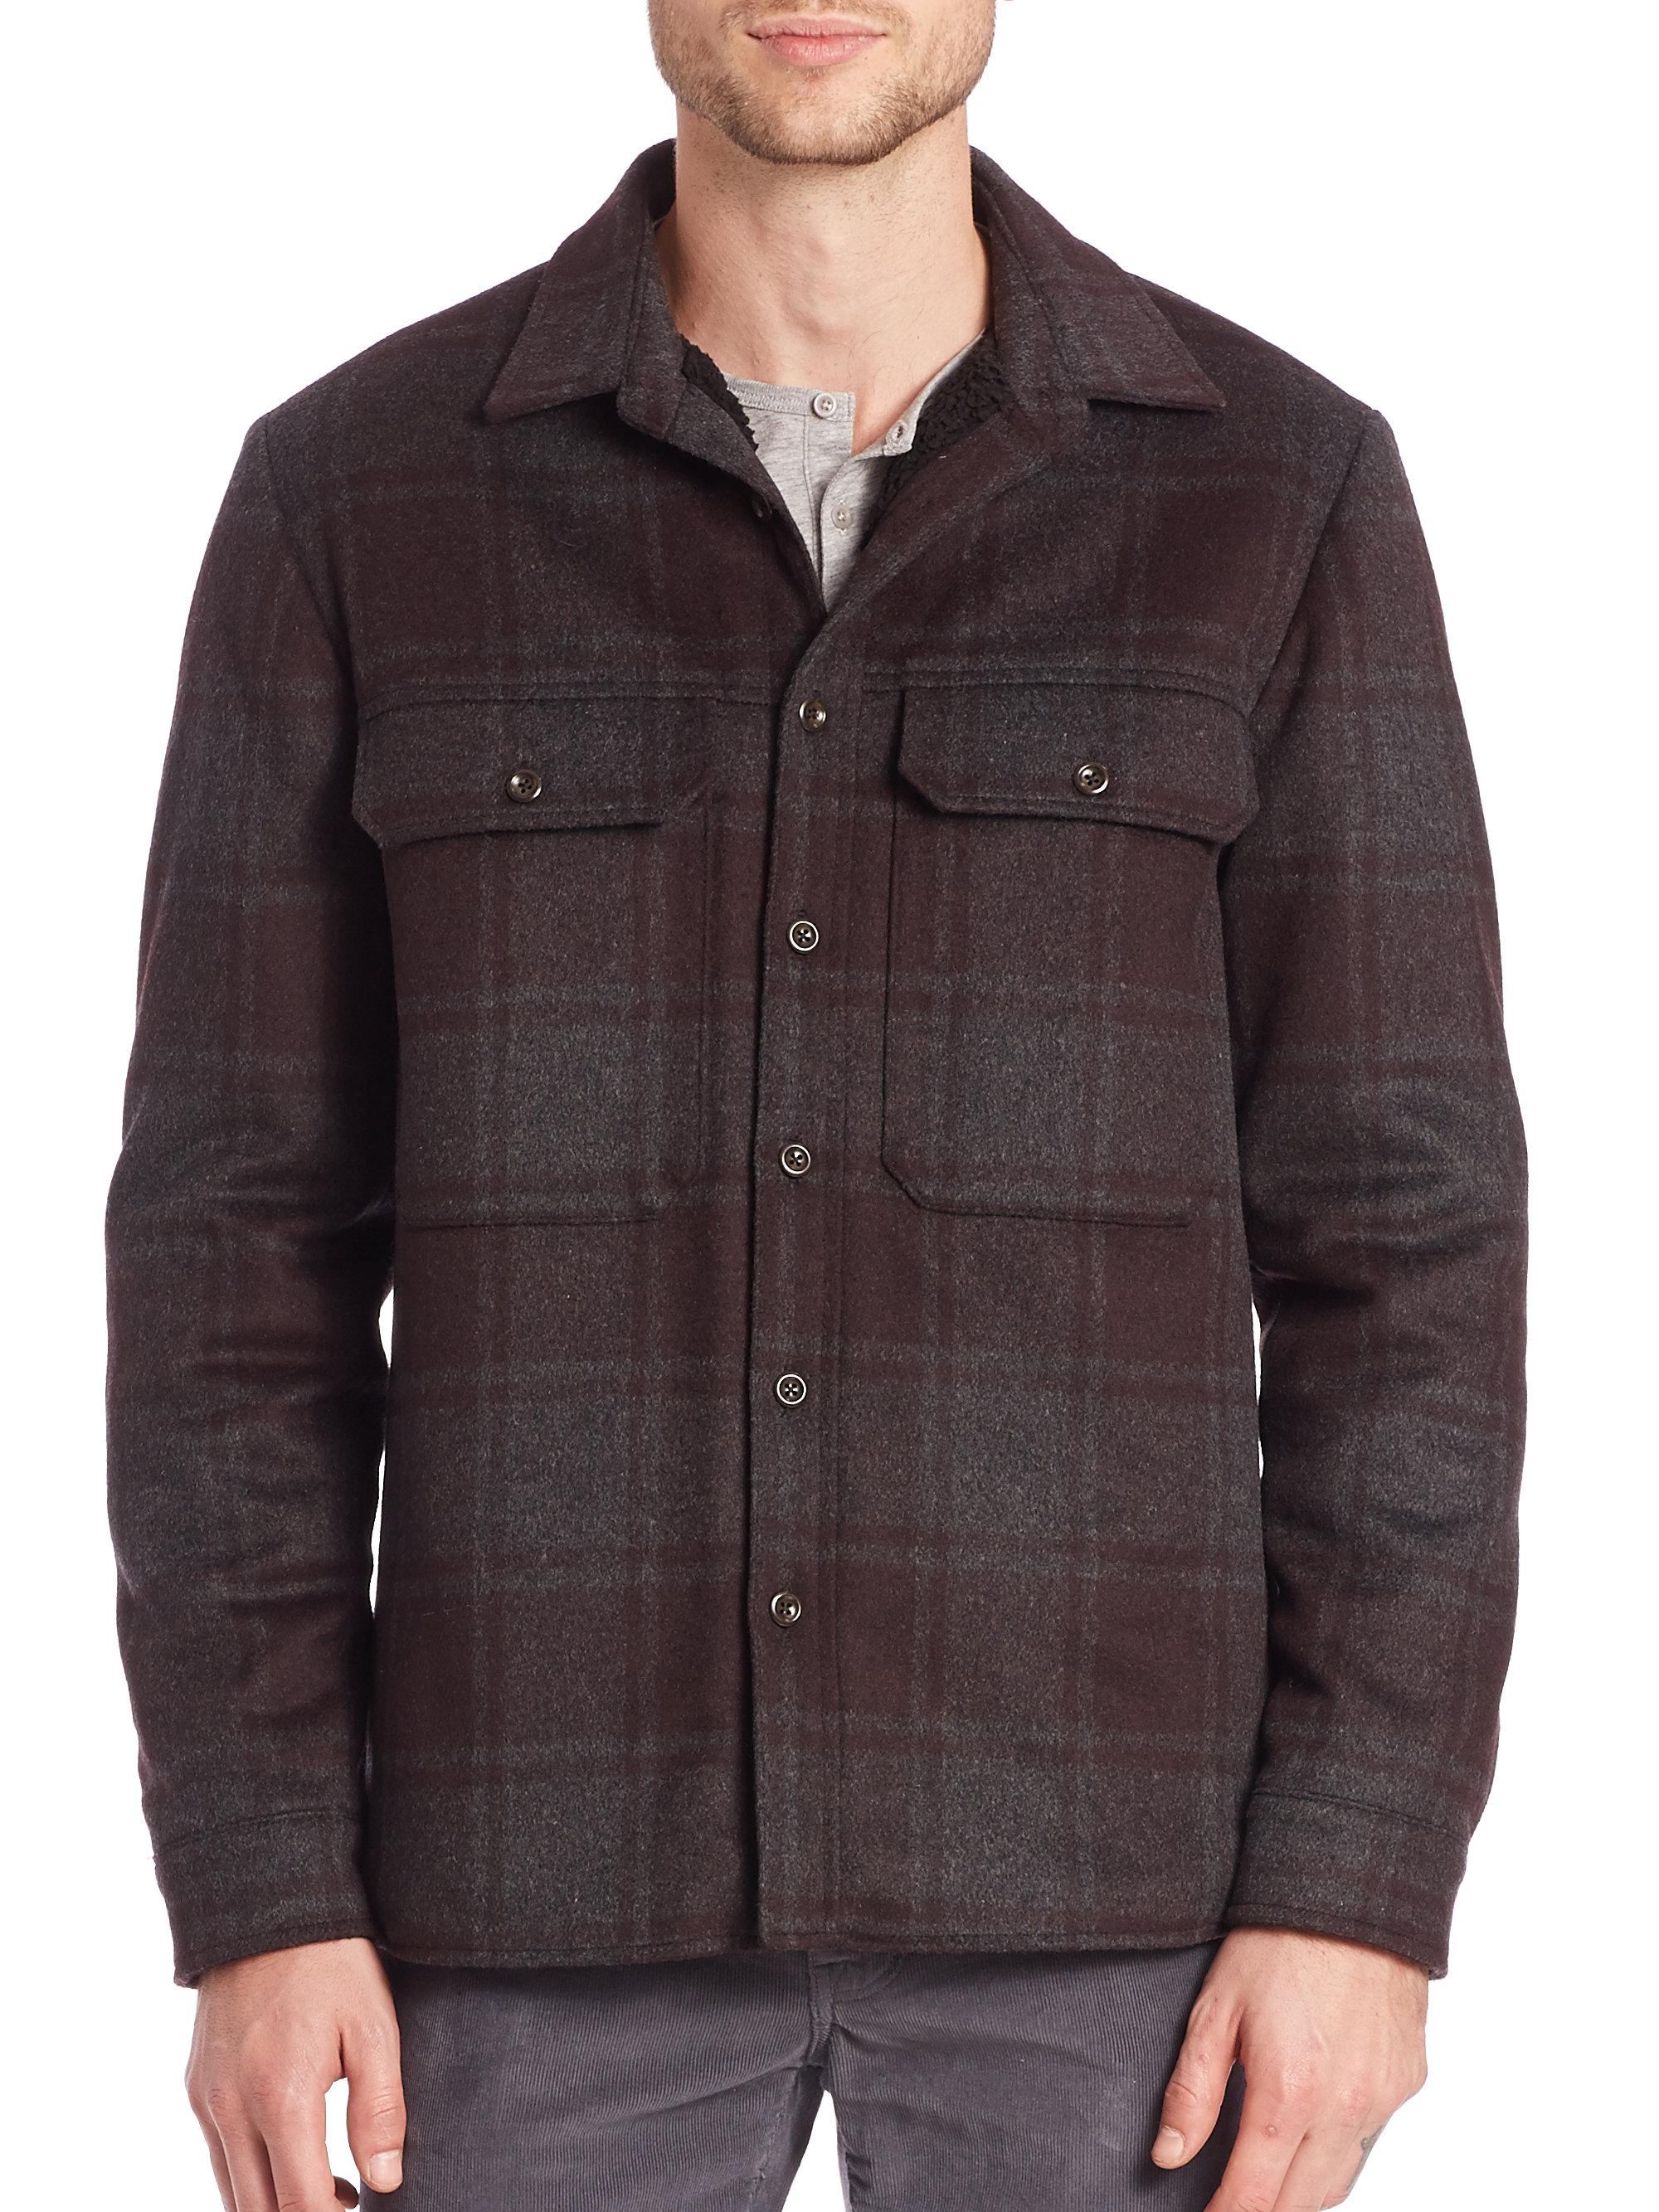 Lyst - Vince Plaid Wool Blend Jacket in Gray for Men